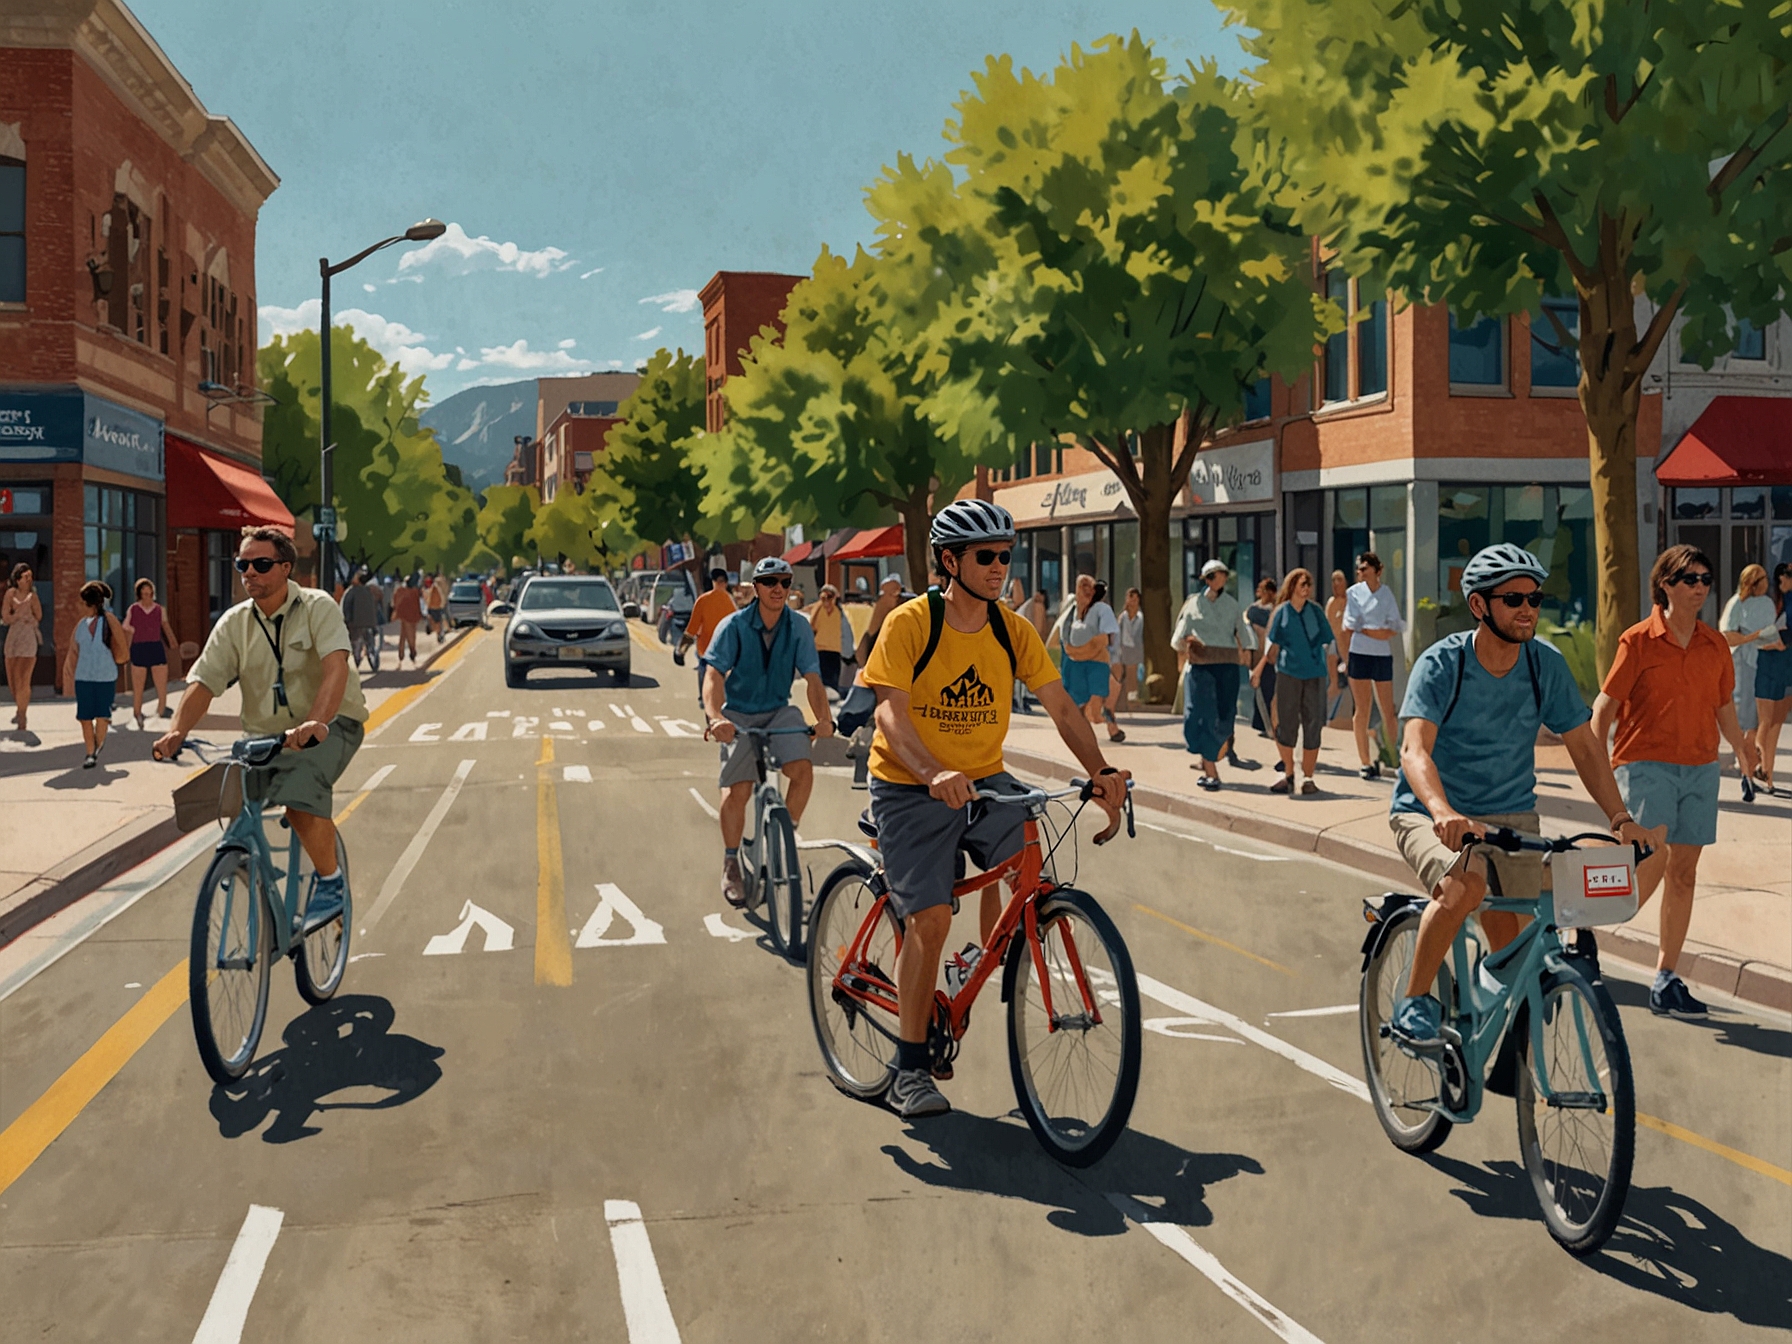 Illustration of a car-free zone in Boulder, featuring pedestrians and cyclists utilizing the space, representing the city's legislative efforts to reduce automobile dependency.